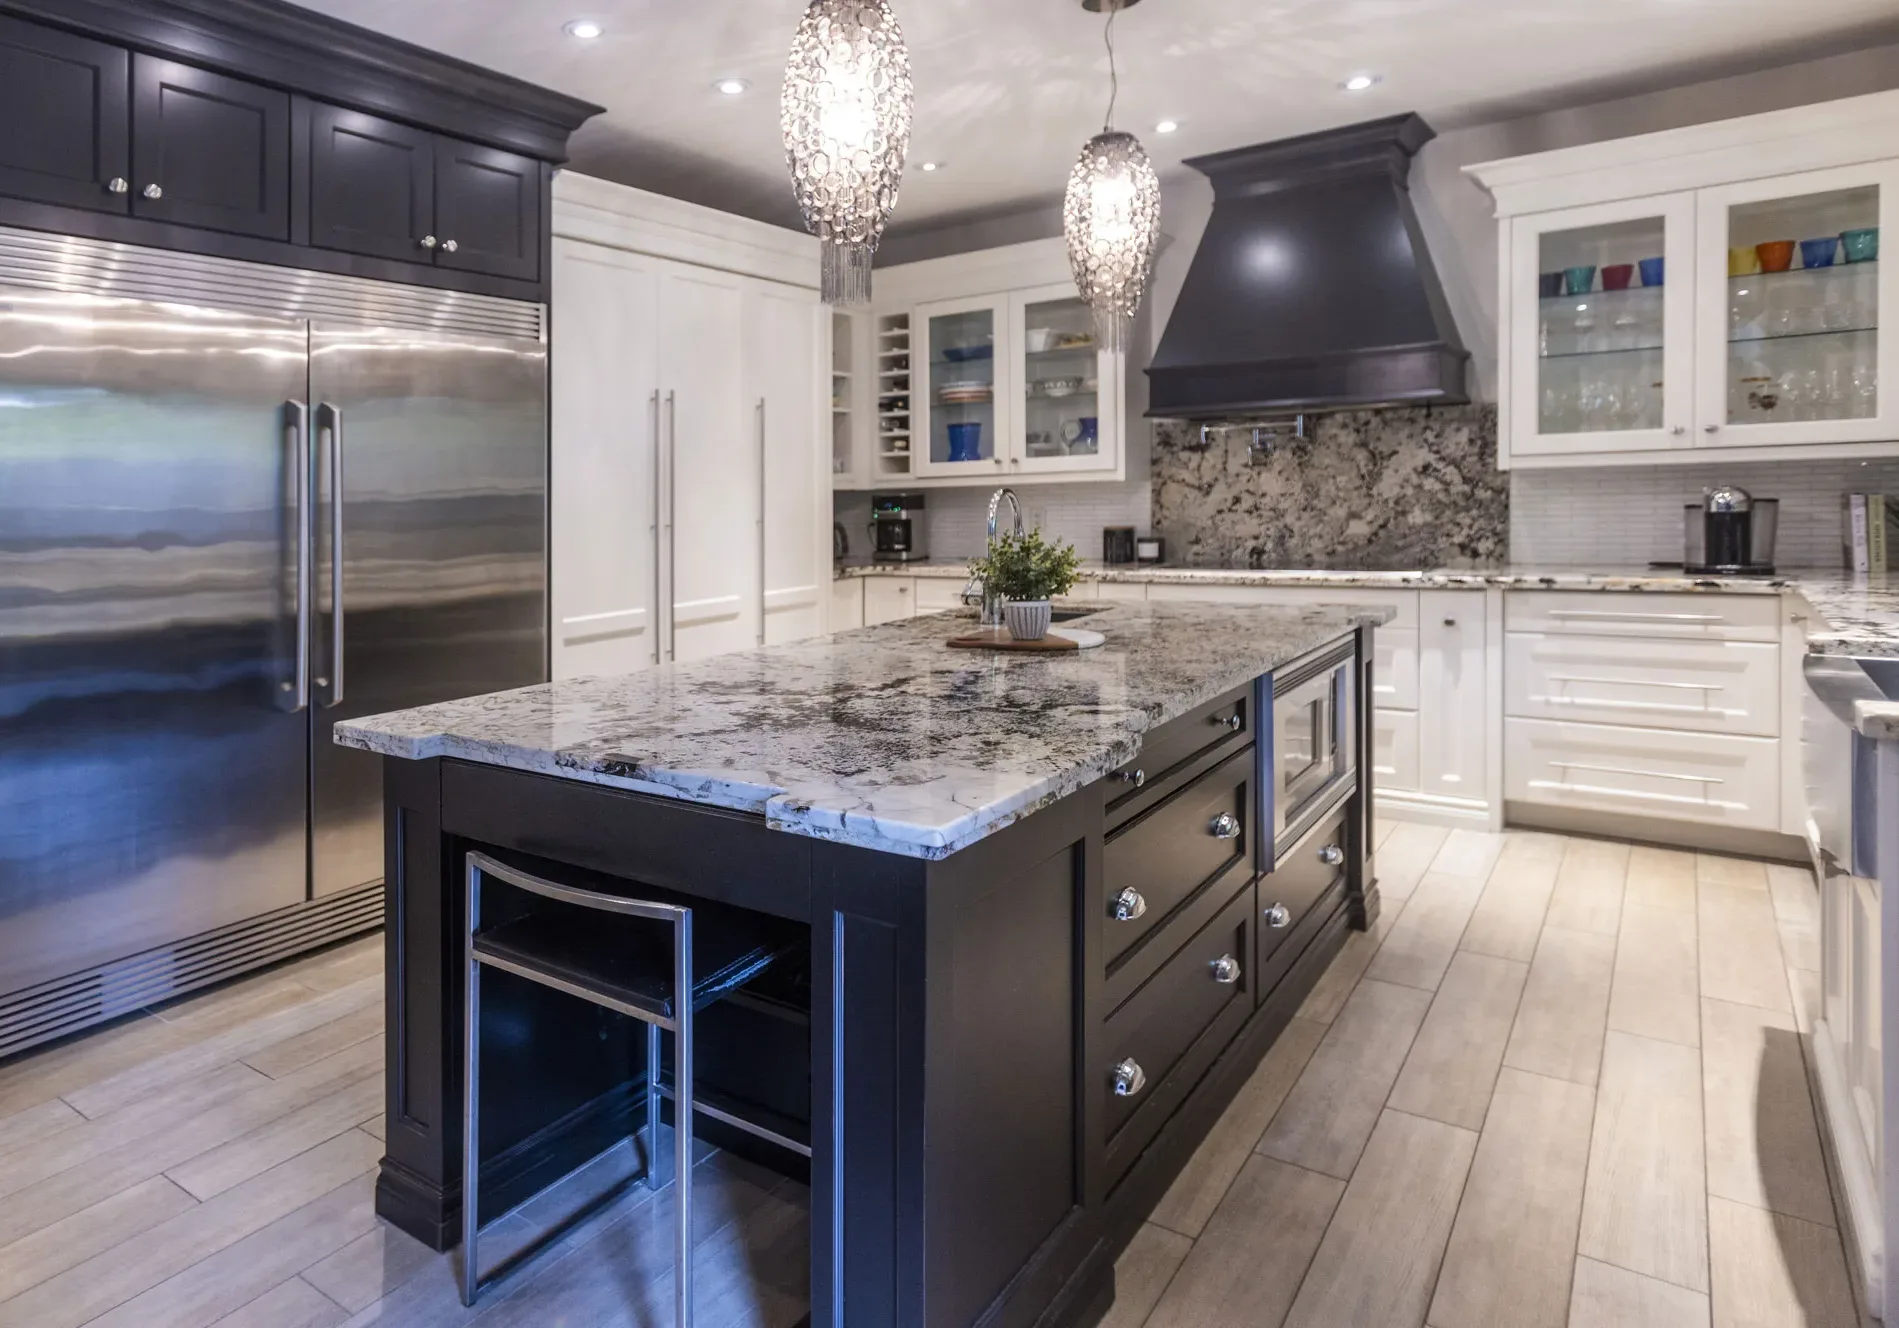 A kitchen with white cabinets and grey and black speckled granite counter top and back splash. Mixed with Dark blue cabinets with